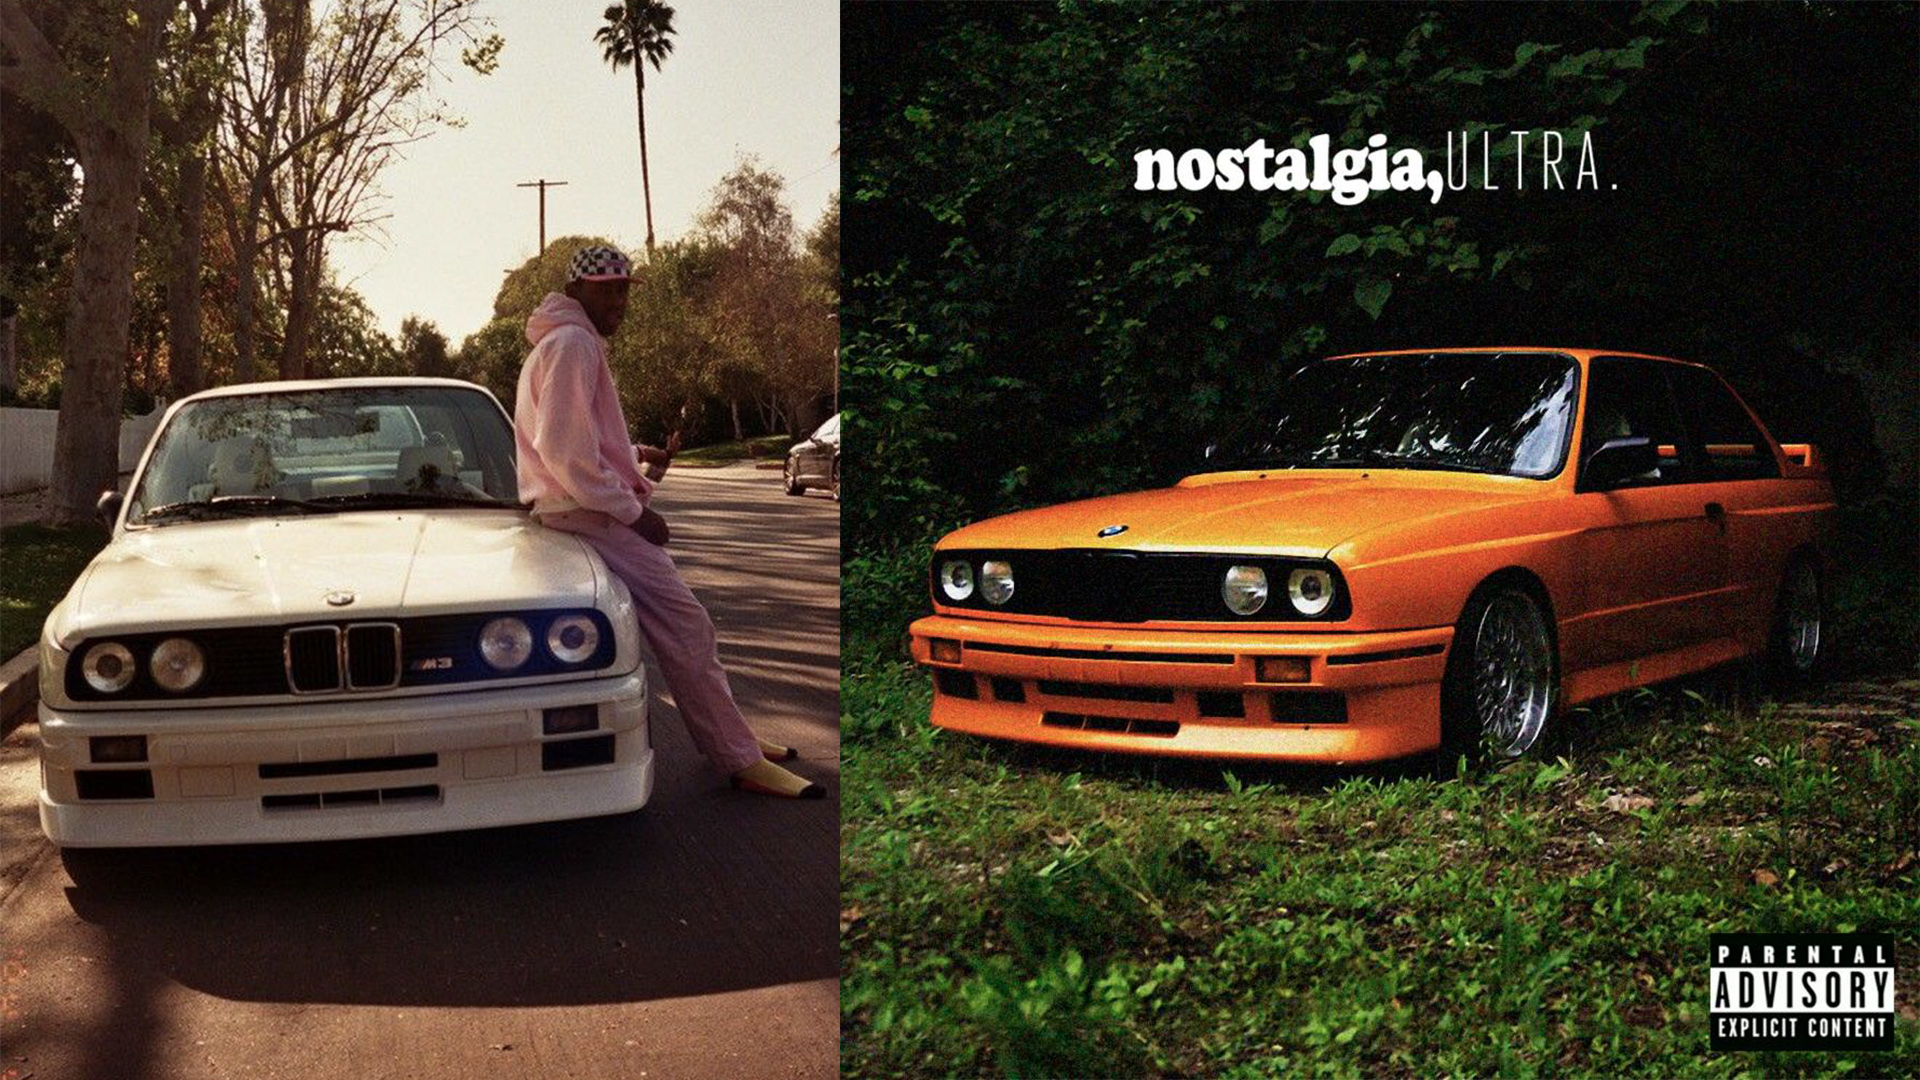 Crazy Tyler The Creator BMW VS Frank Ocean's: Matching E30s and tuned M3s